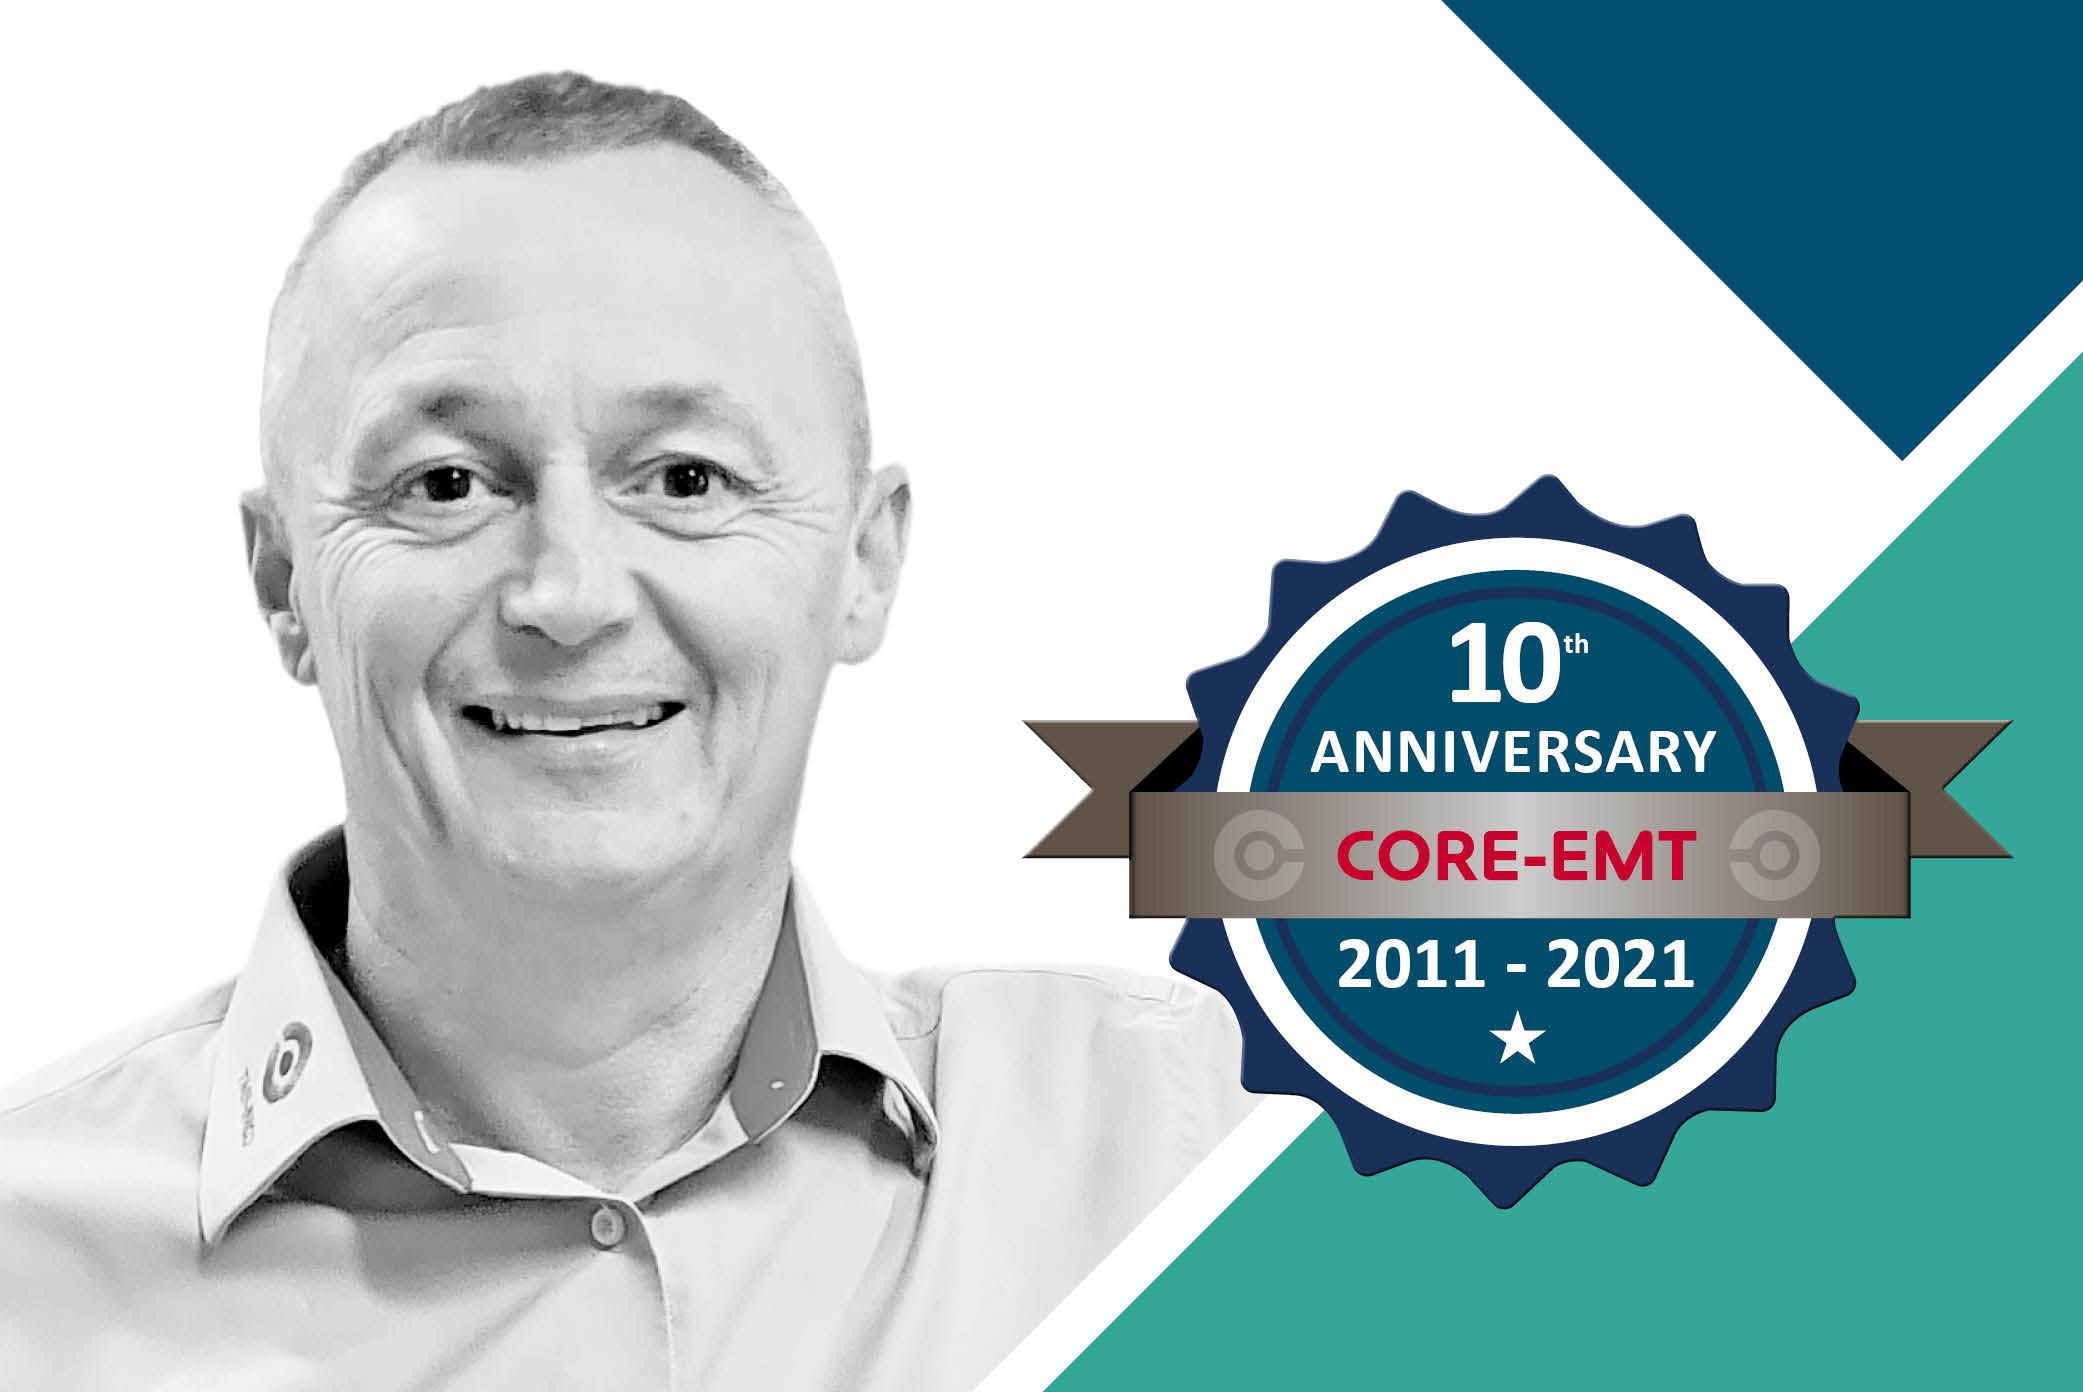 CORE-emt founder Steen V. Haugbølle thanks you for enabling us to reach 10-year milestone